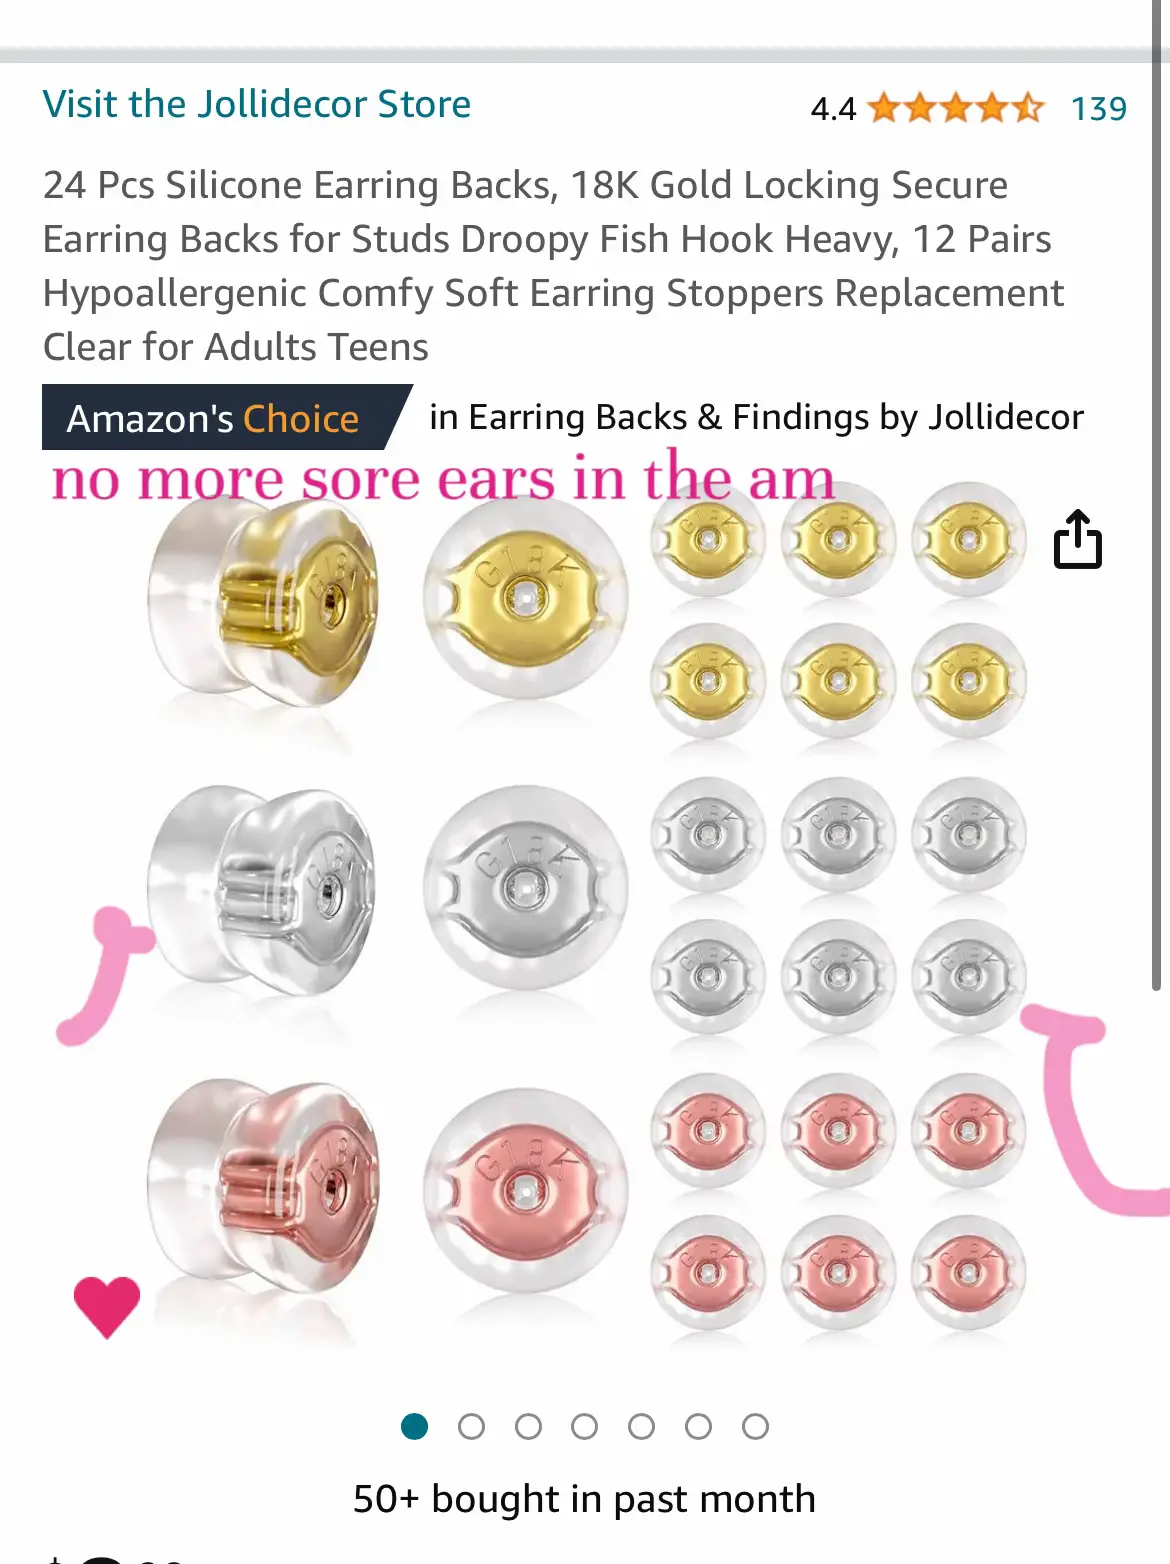  24 Pcs Silicone Earring Backs, 18K Gold Locking Secure Earring  Backs for Studs Droopy Fish Hook Heavy, 12 Pairs Hypoallergenic Comfy Soft  Earring Stoppers Replacement Clear for Adults Teens